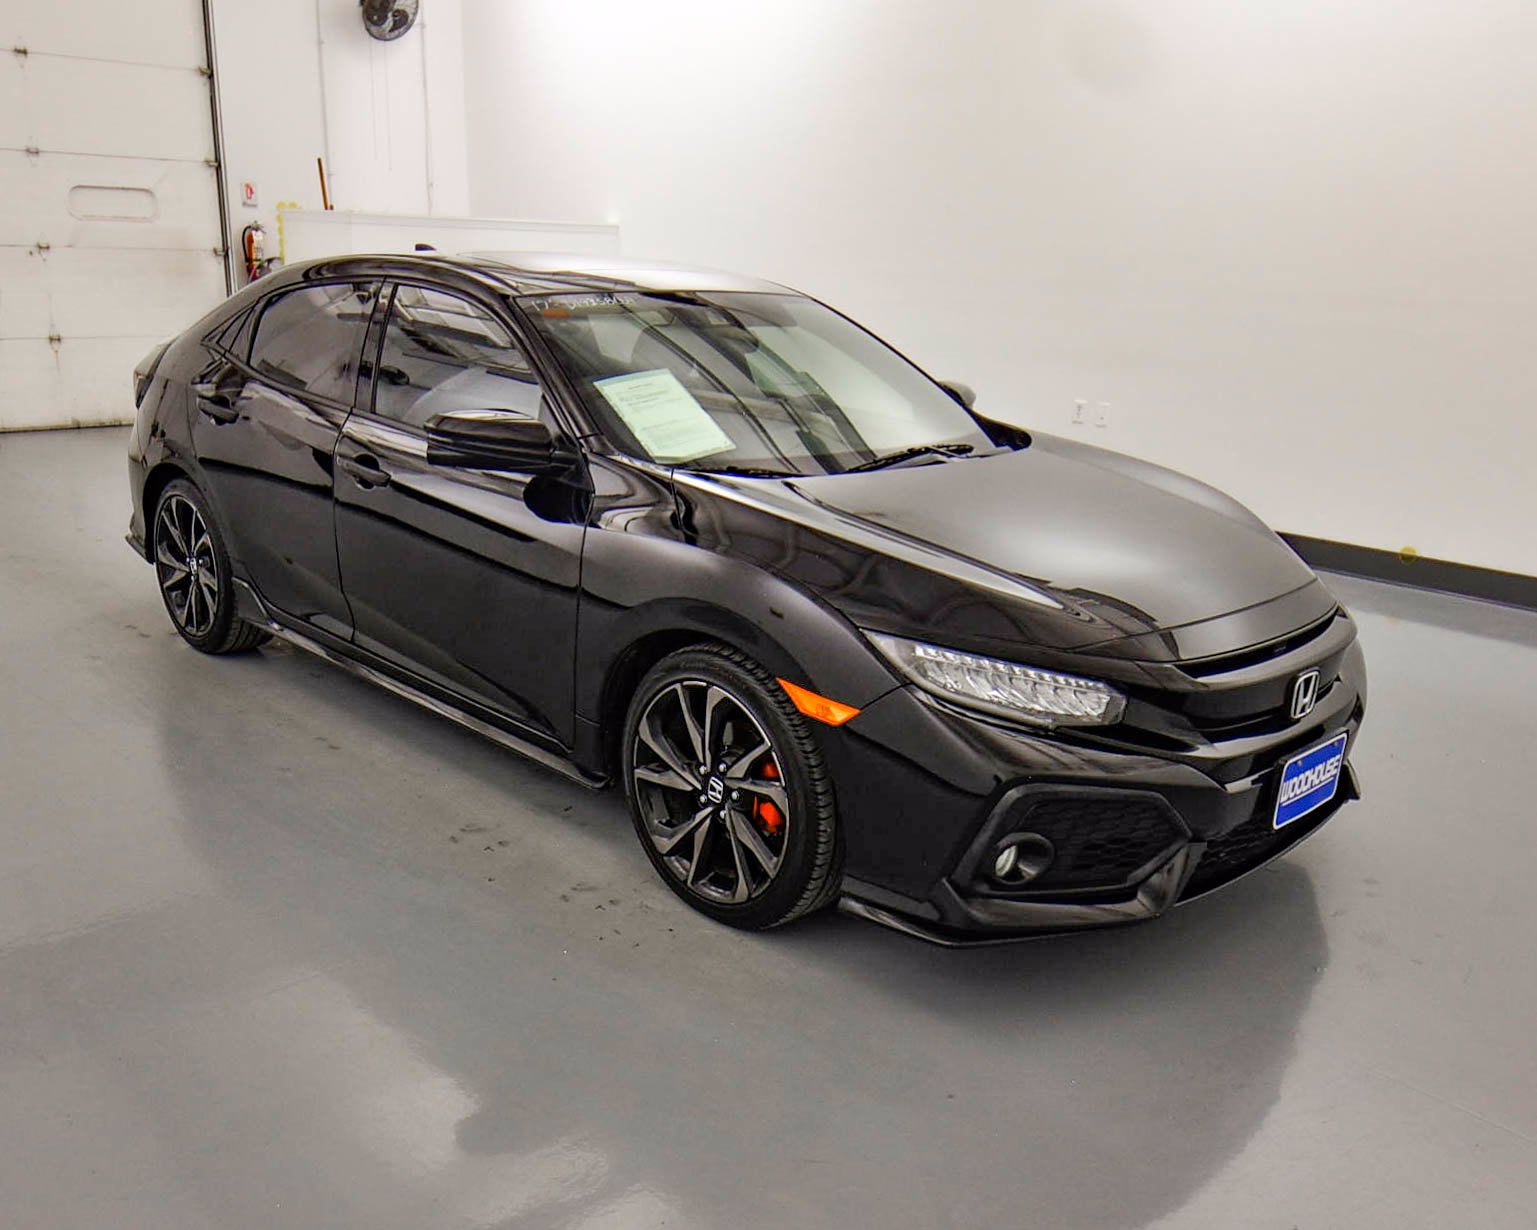 PreOwned 2017 Honda Civic Hatchback Sport Touring With